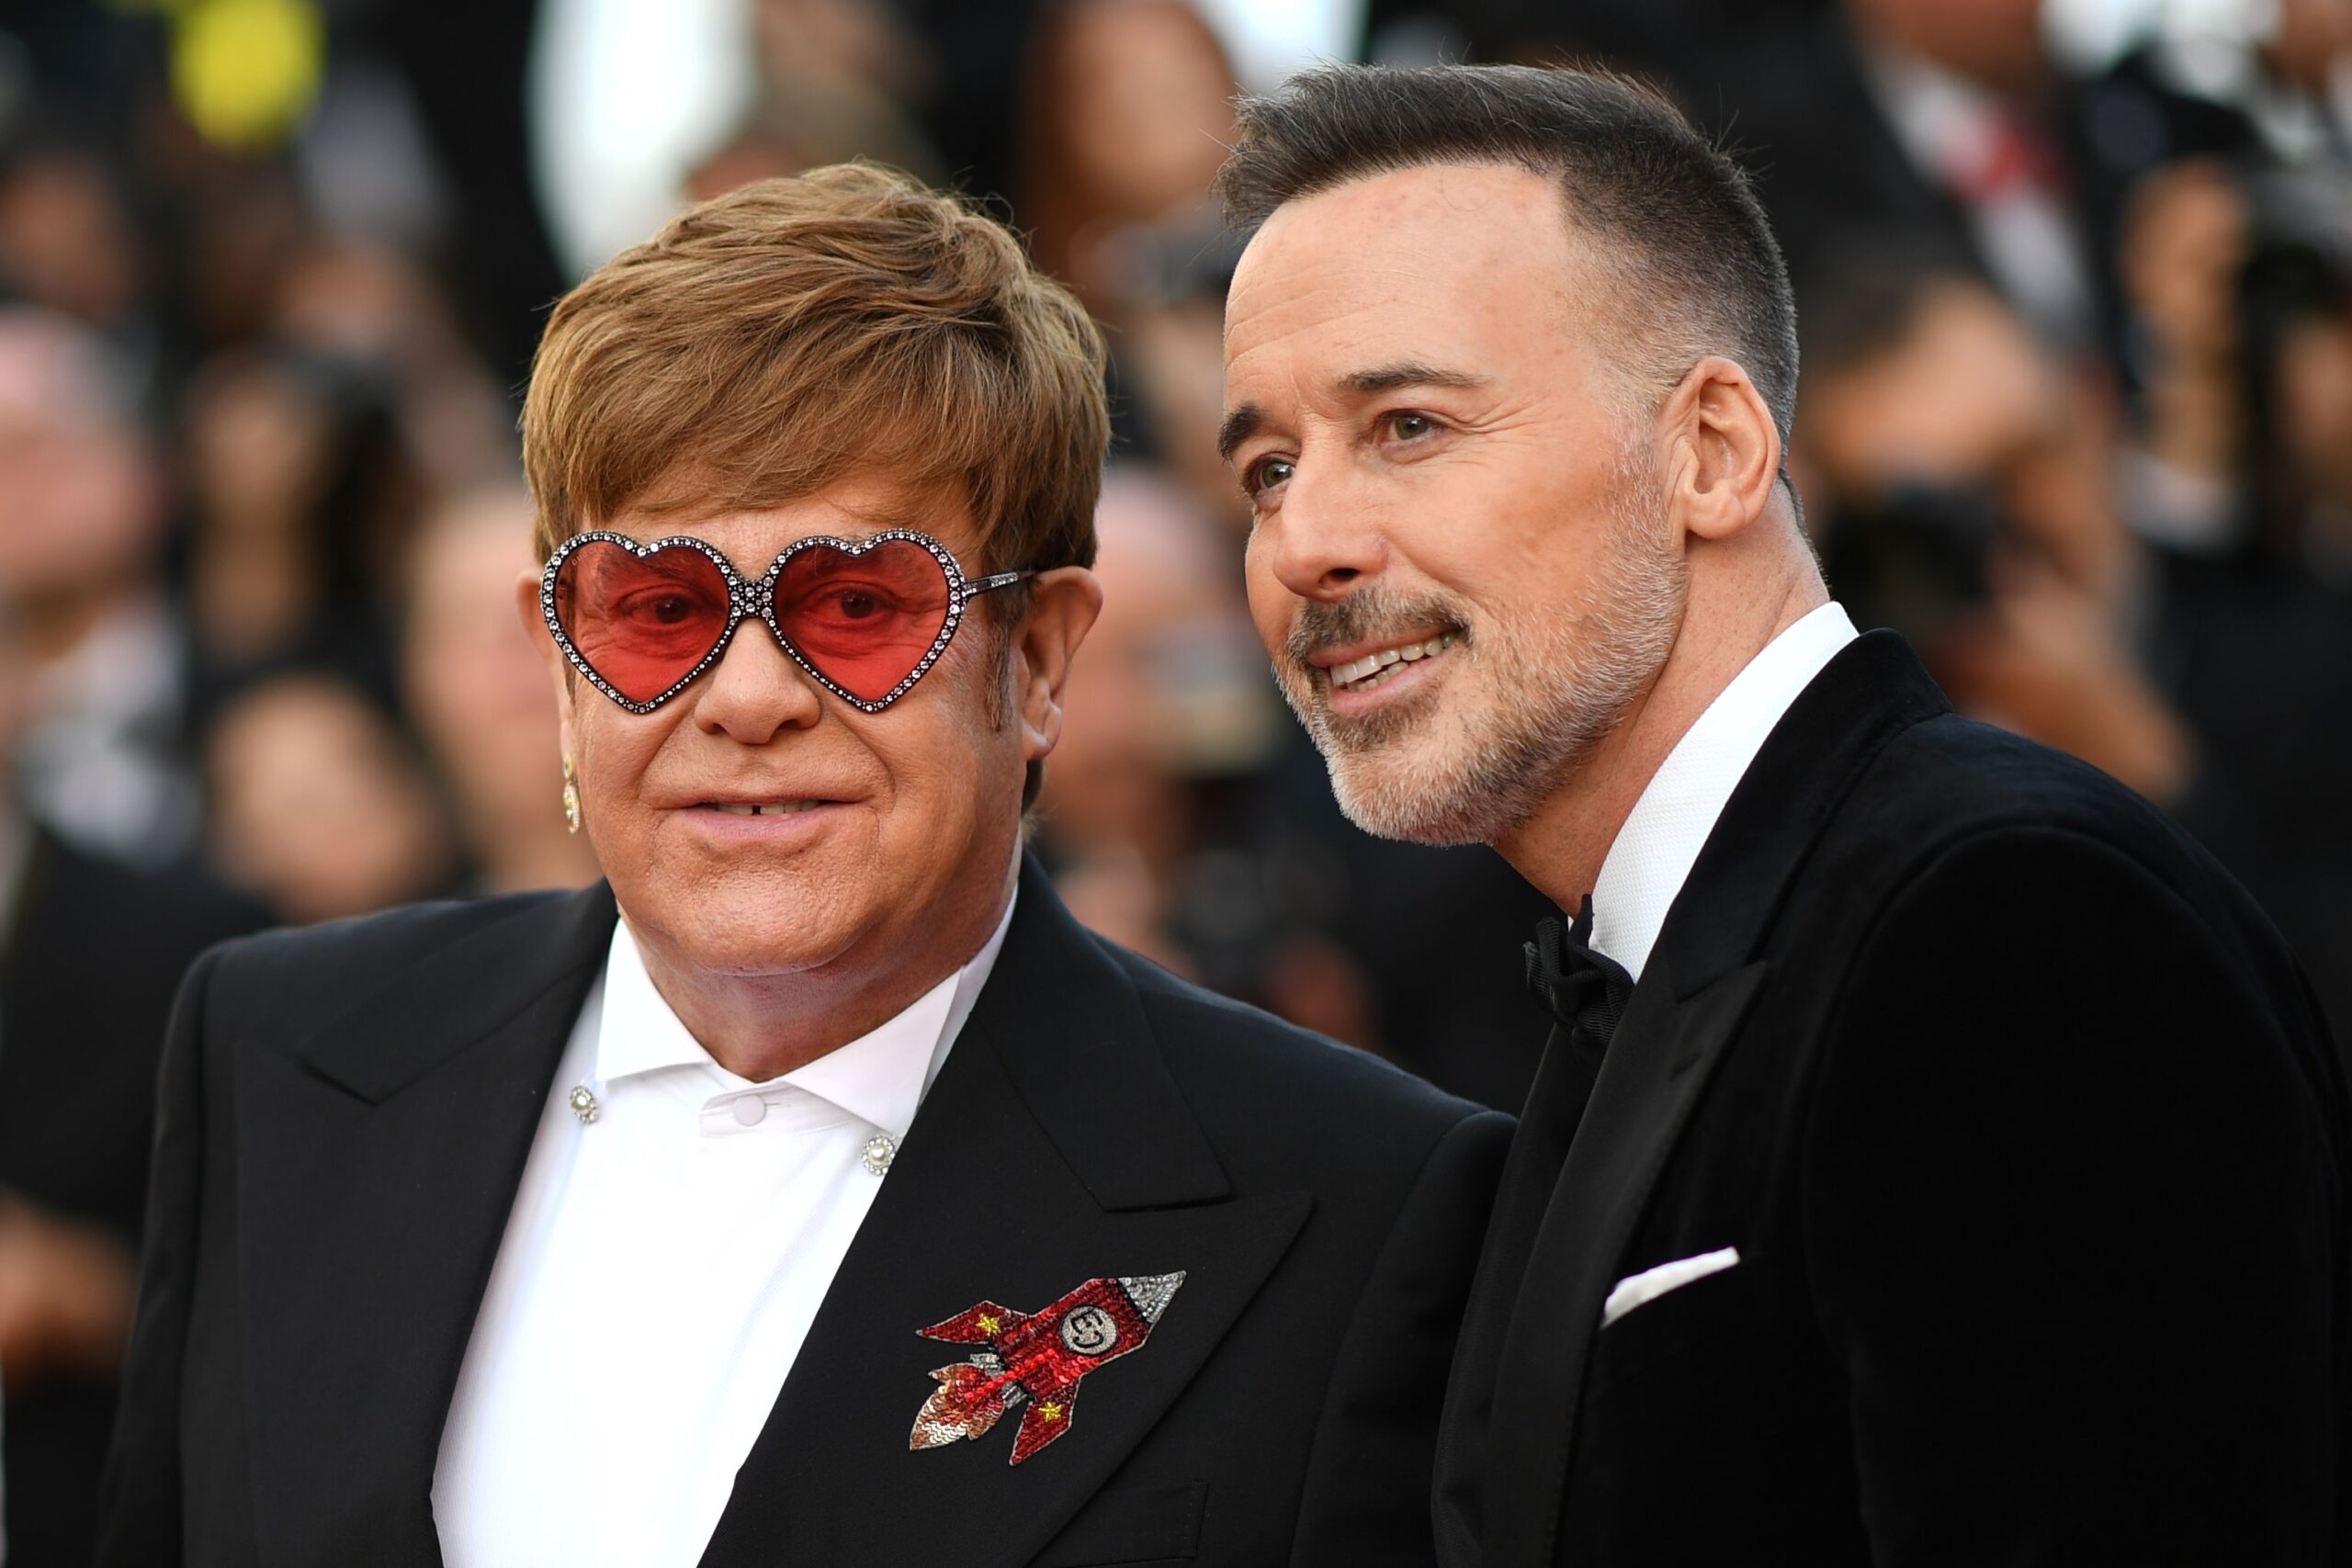 How long have Elton John and his husband been together? - Celebrity FAQs